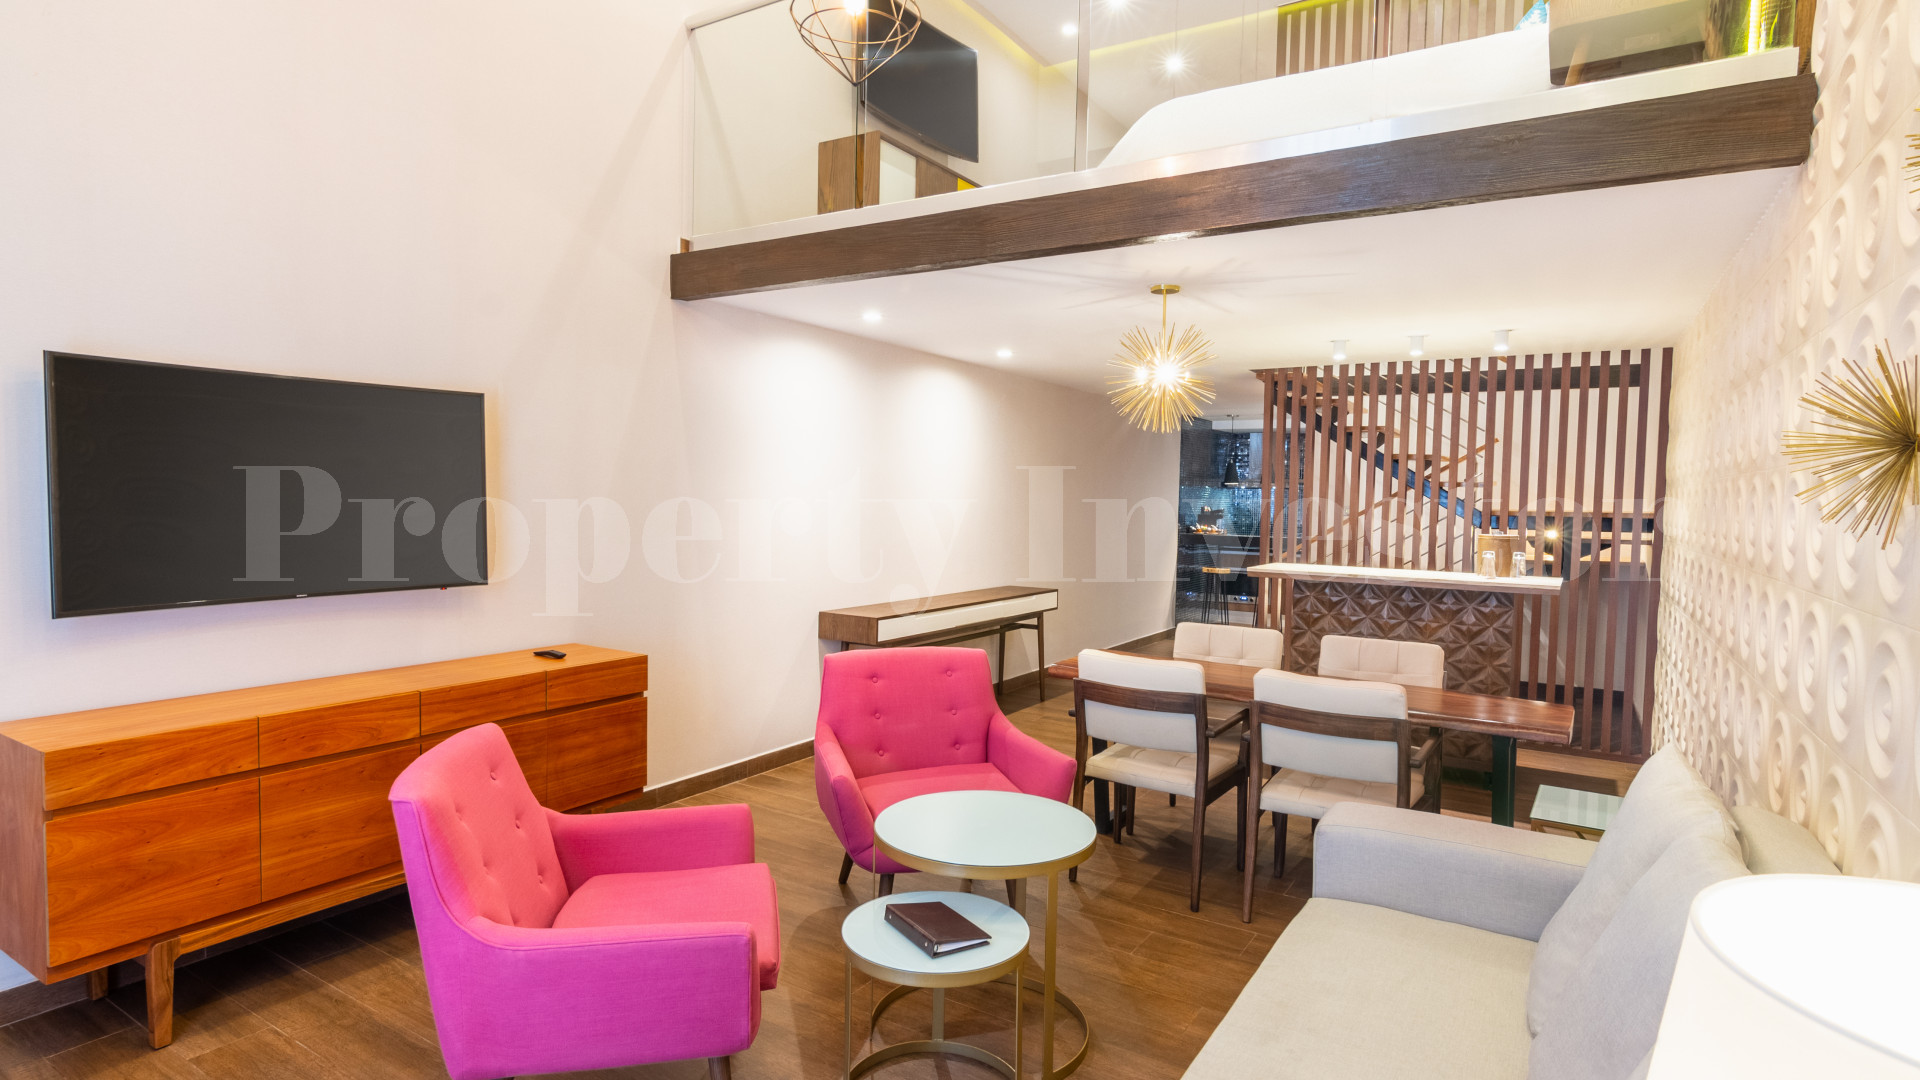 Exclusive 1 Bedroom Boutique Hotel Investment in Playa del Carmen (Unit 214)